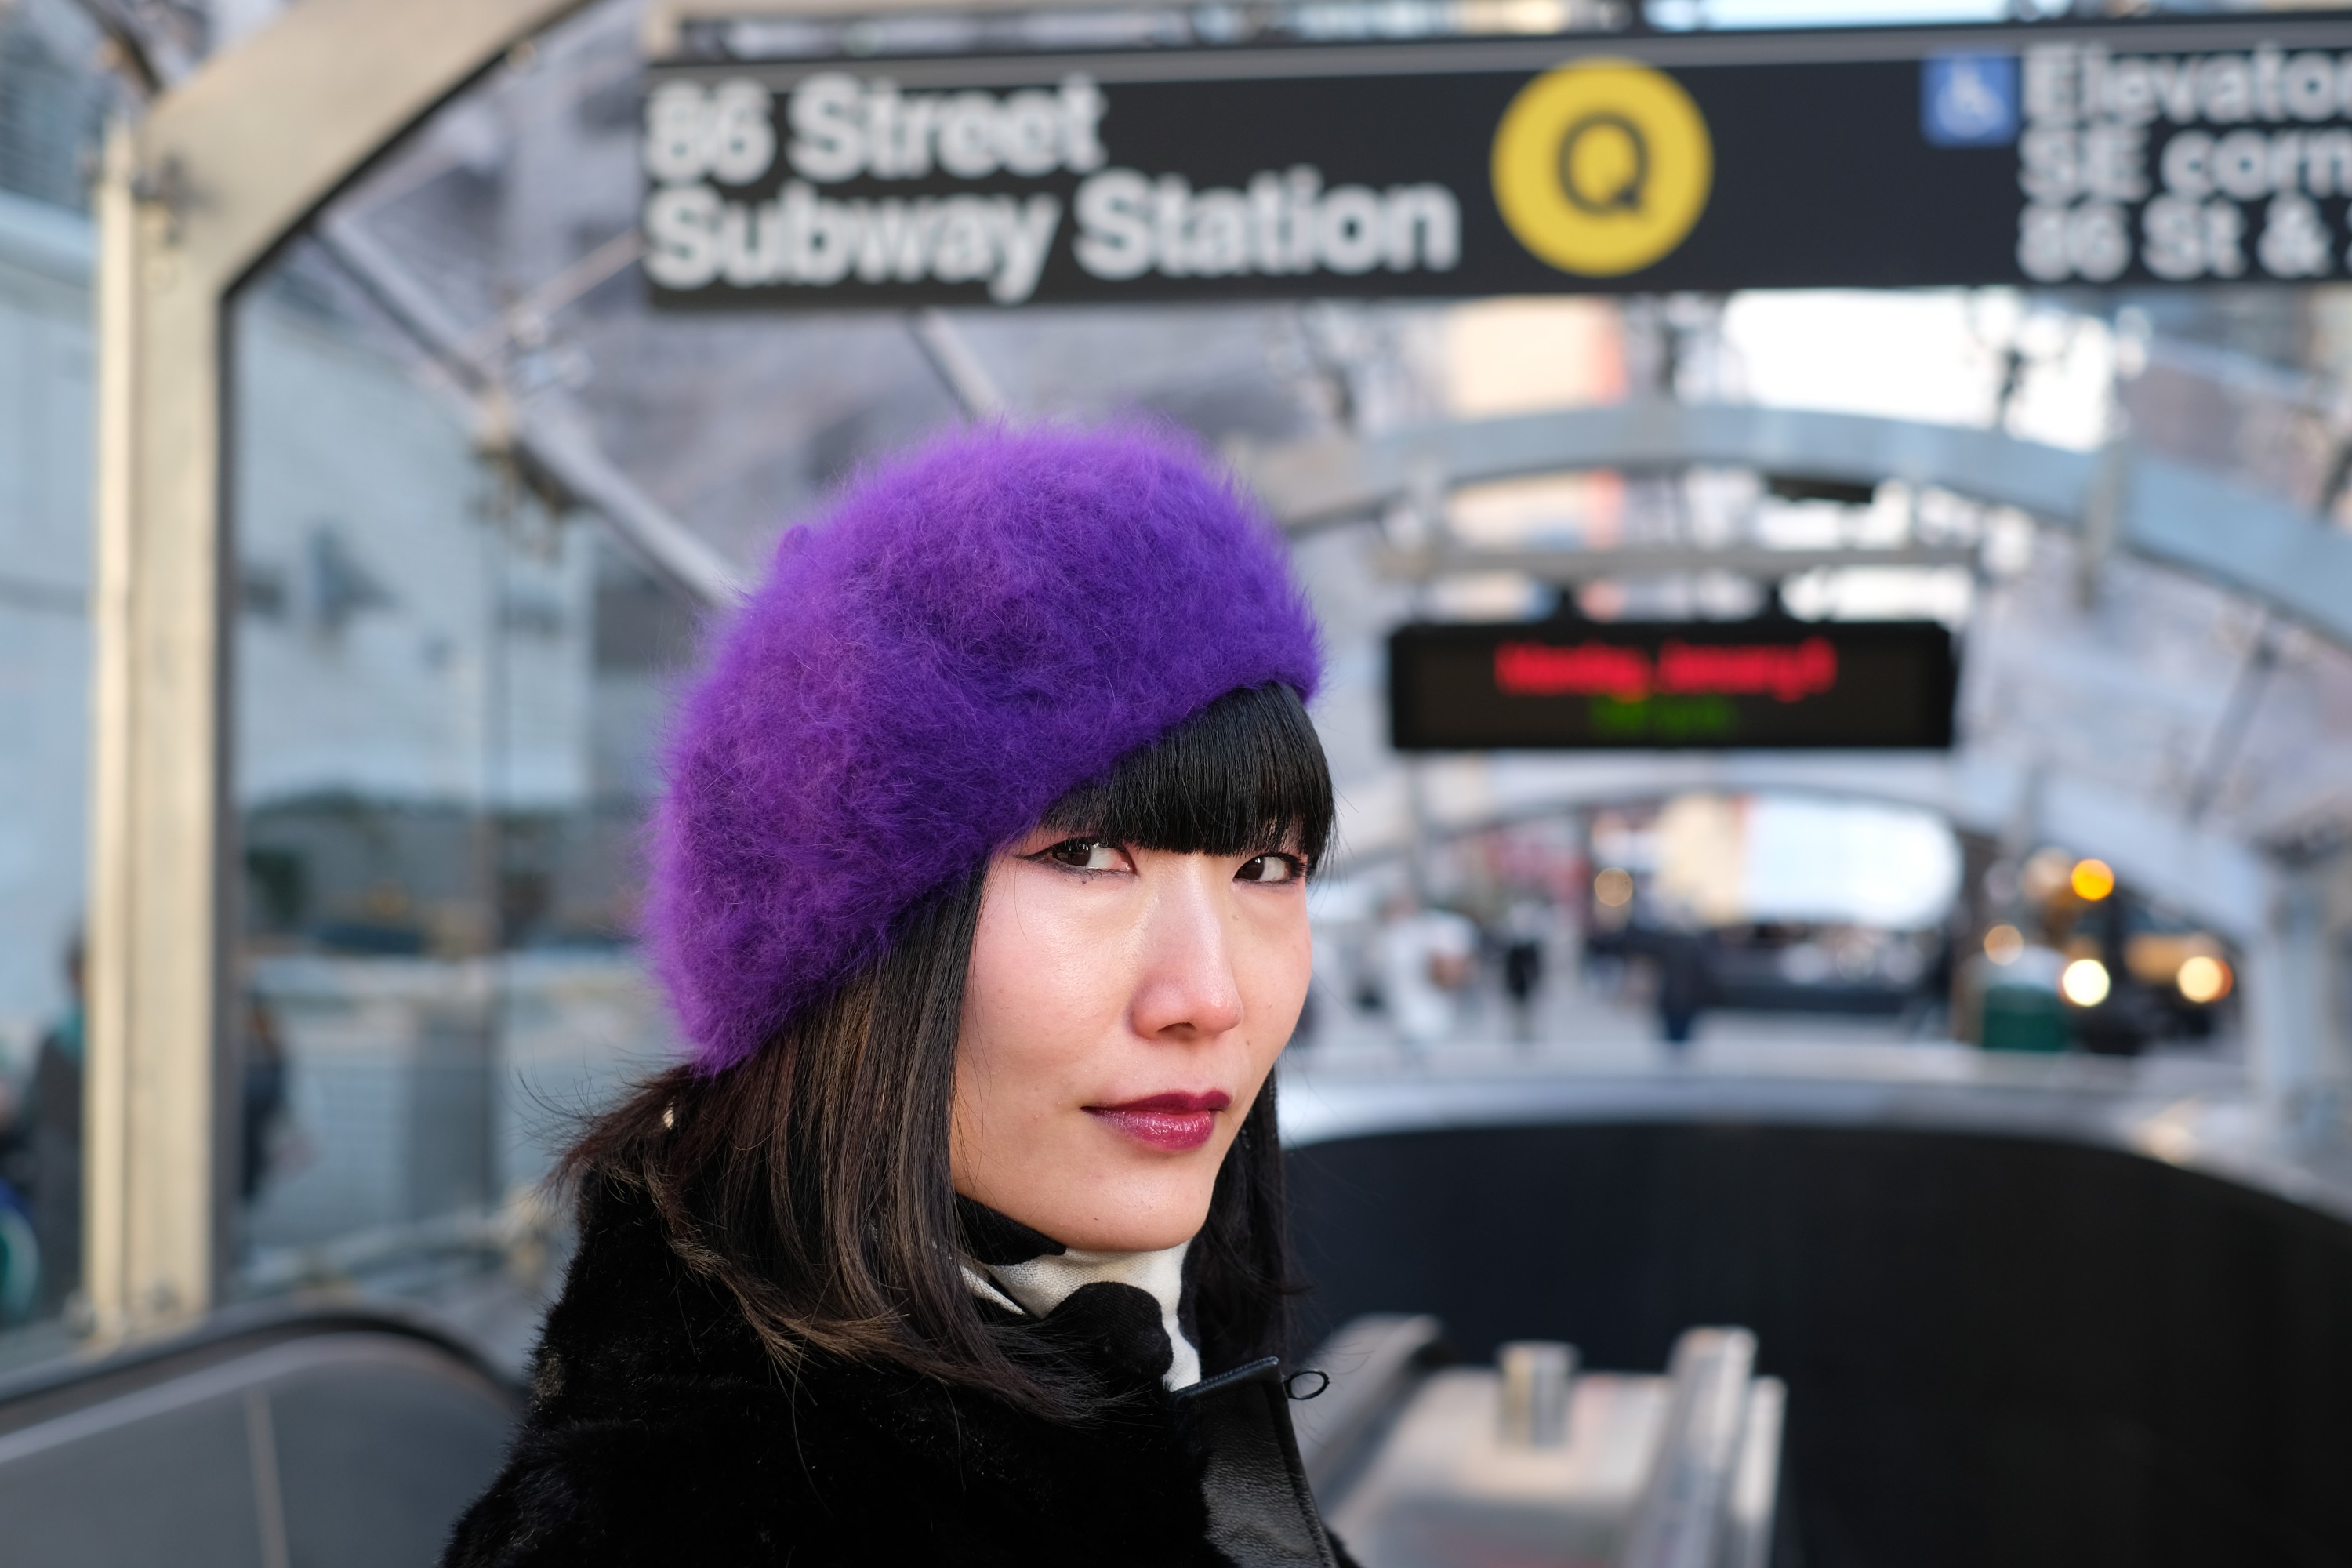 Girl in purple beret in front of subway station